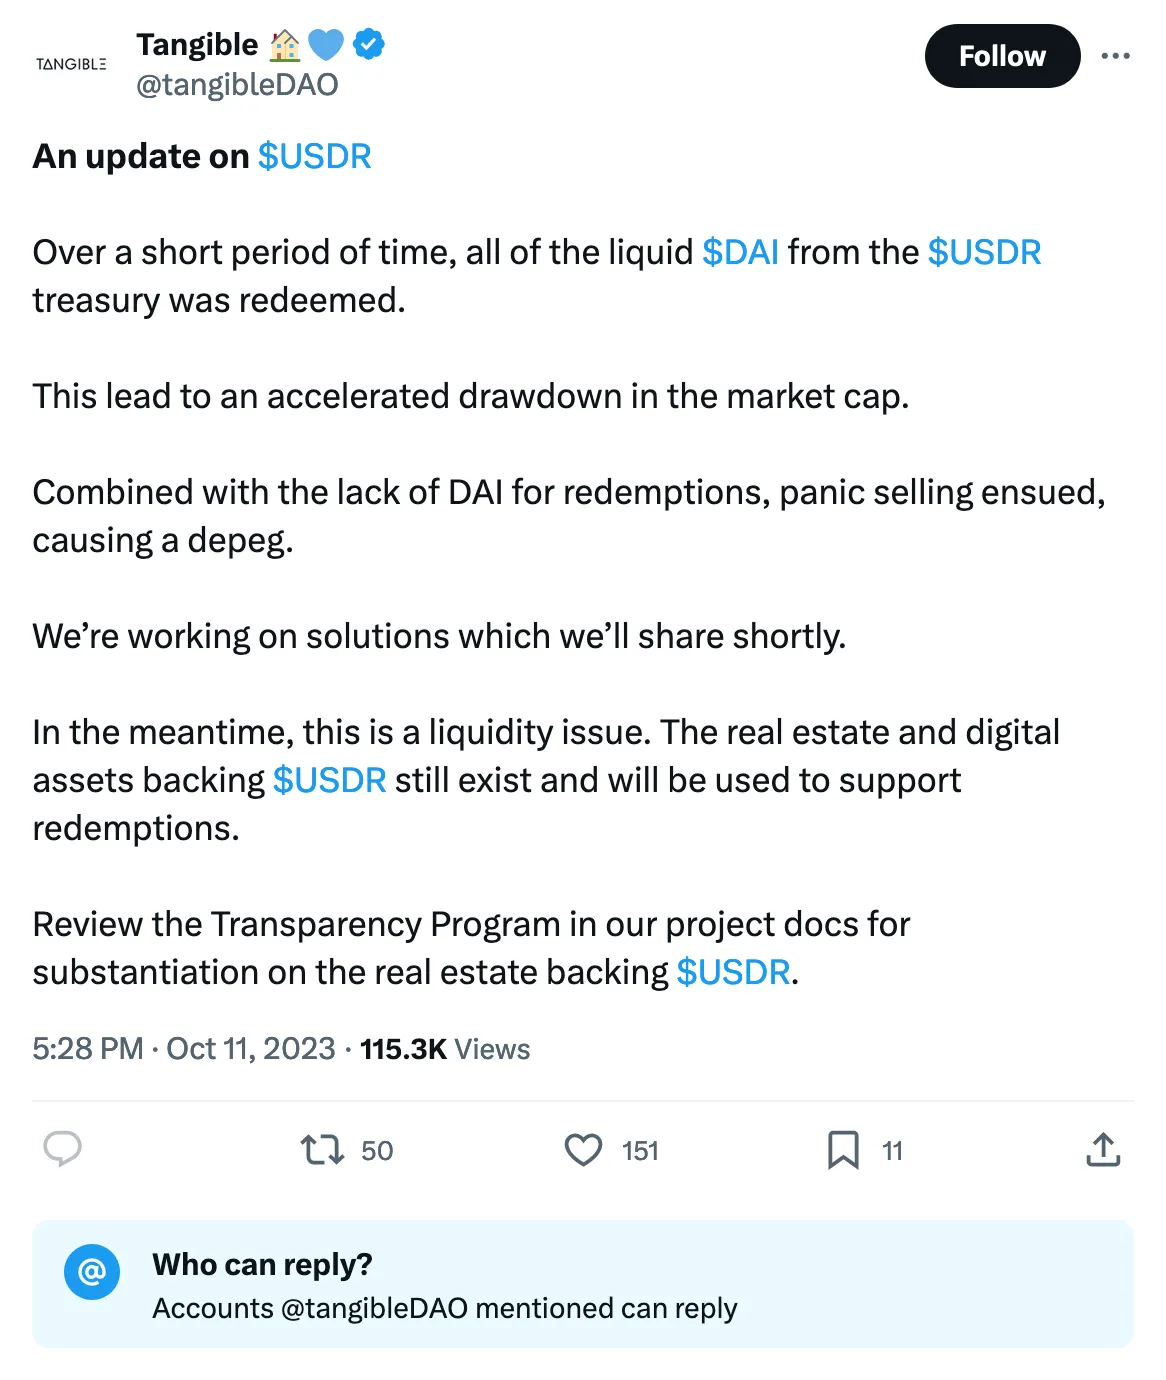 An update on $USDR

Over a short period of time, all of the liquid $DAI from the $USDR treasury was redeemed.

This lead to an accelerated drawdown in the market cap.

Combined with the lack of DAI for redemptions, panic selling ensued, causing a depeg.

We’re working on solutions which we’ll share shortly.

In the meantime, this is a liquidity issue. The real estate and digital assets backing $USDR still exist and will be used to support redemptions.

Review the Transparency Program in our project docs for substantiation on the real estate backing $USDR. 
Tweeted at 5:28 PM · Oct 11, 2023